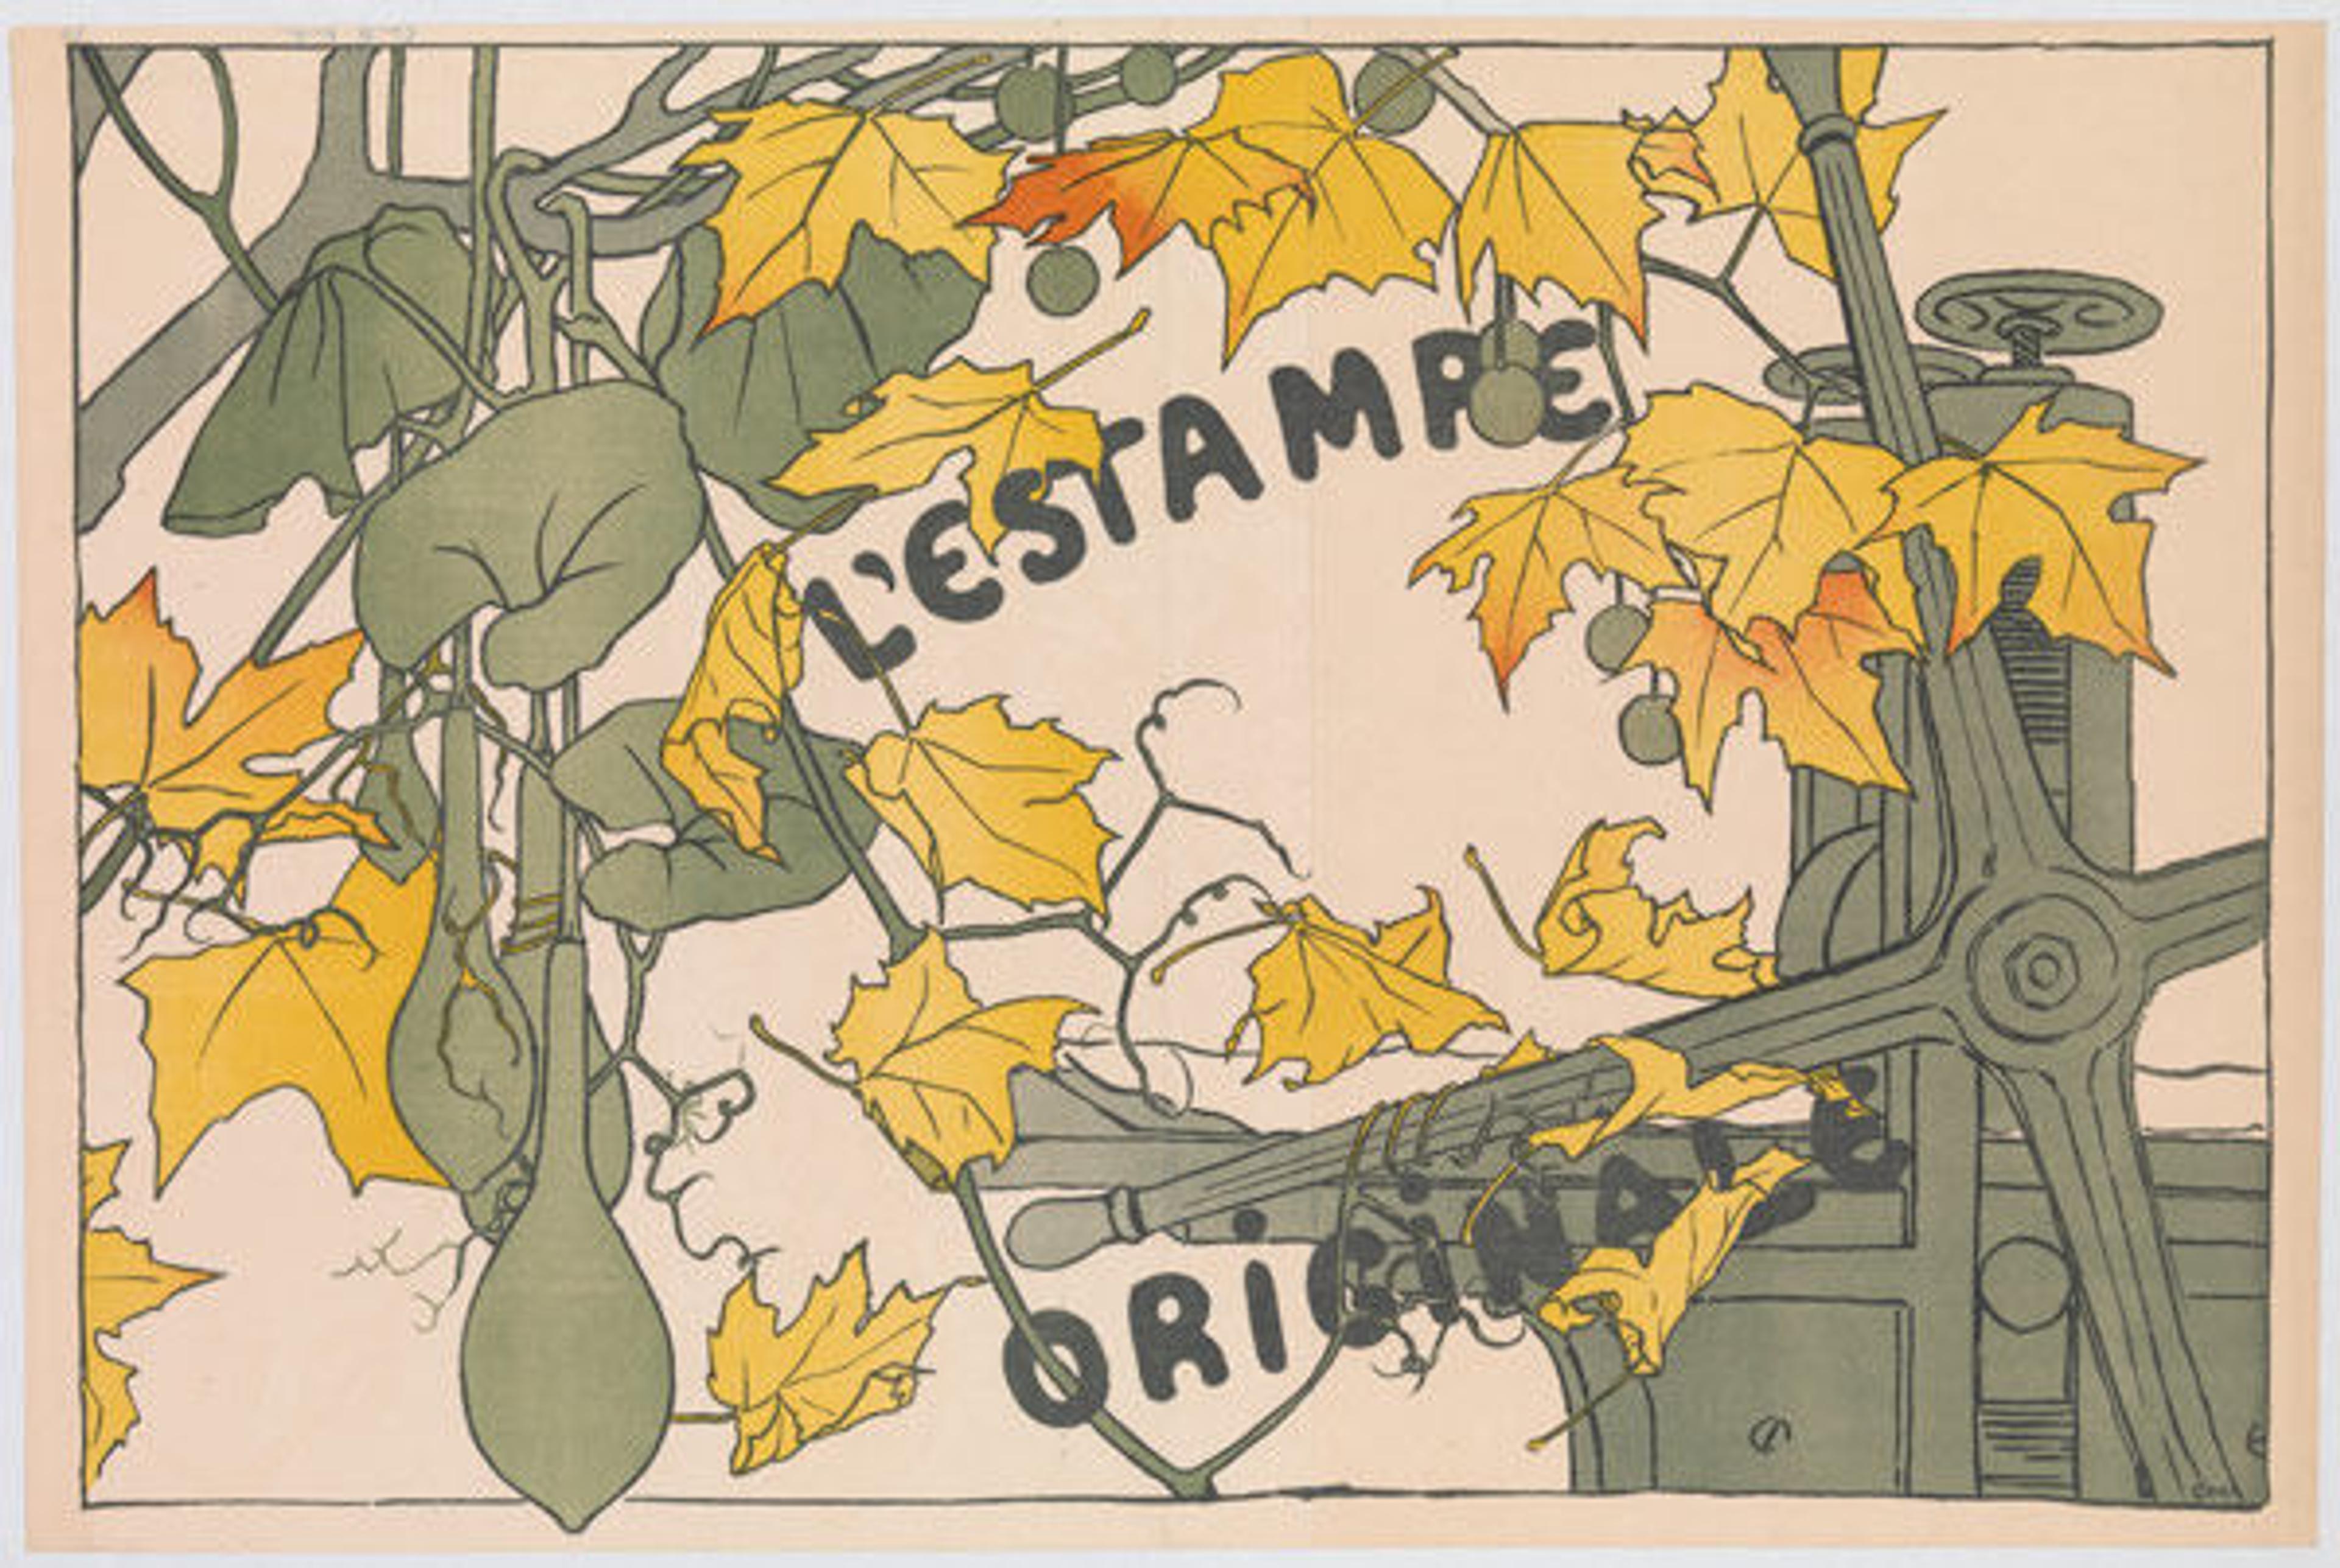 L'Estampe Originale (Cover to Album V), January–March 1894, French. Camille Martin (French, 1861–1898). Publisher André Marty (French, born 1857). Color lithograph; Other: 33 1/4 × 22 5/16 in. (84.5 × 56.7 cm). Other: 34 3/4 × 23 5/16 in. (88.3 × 59.2 cm). The Metropolitan Museum of Art, New York, Rogers Fund, 1922 (22.82.1-41)